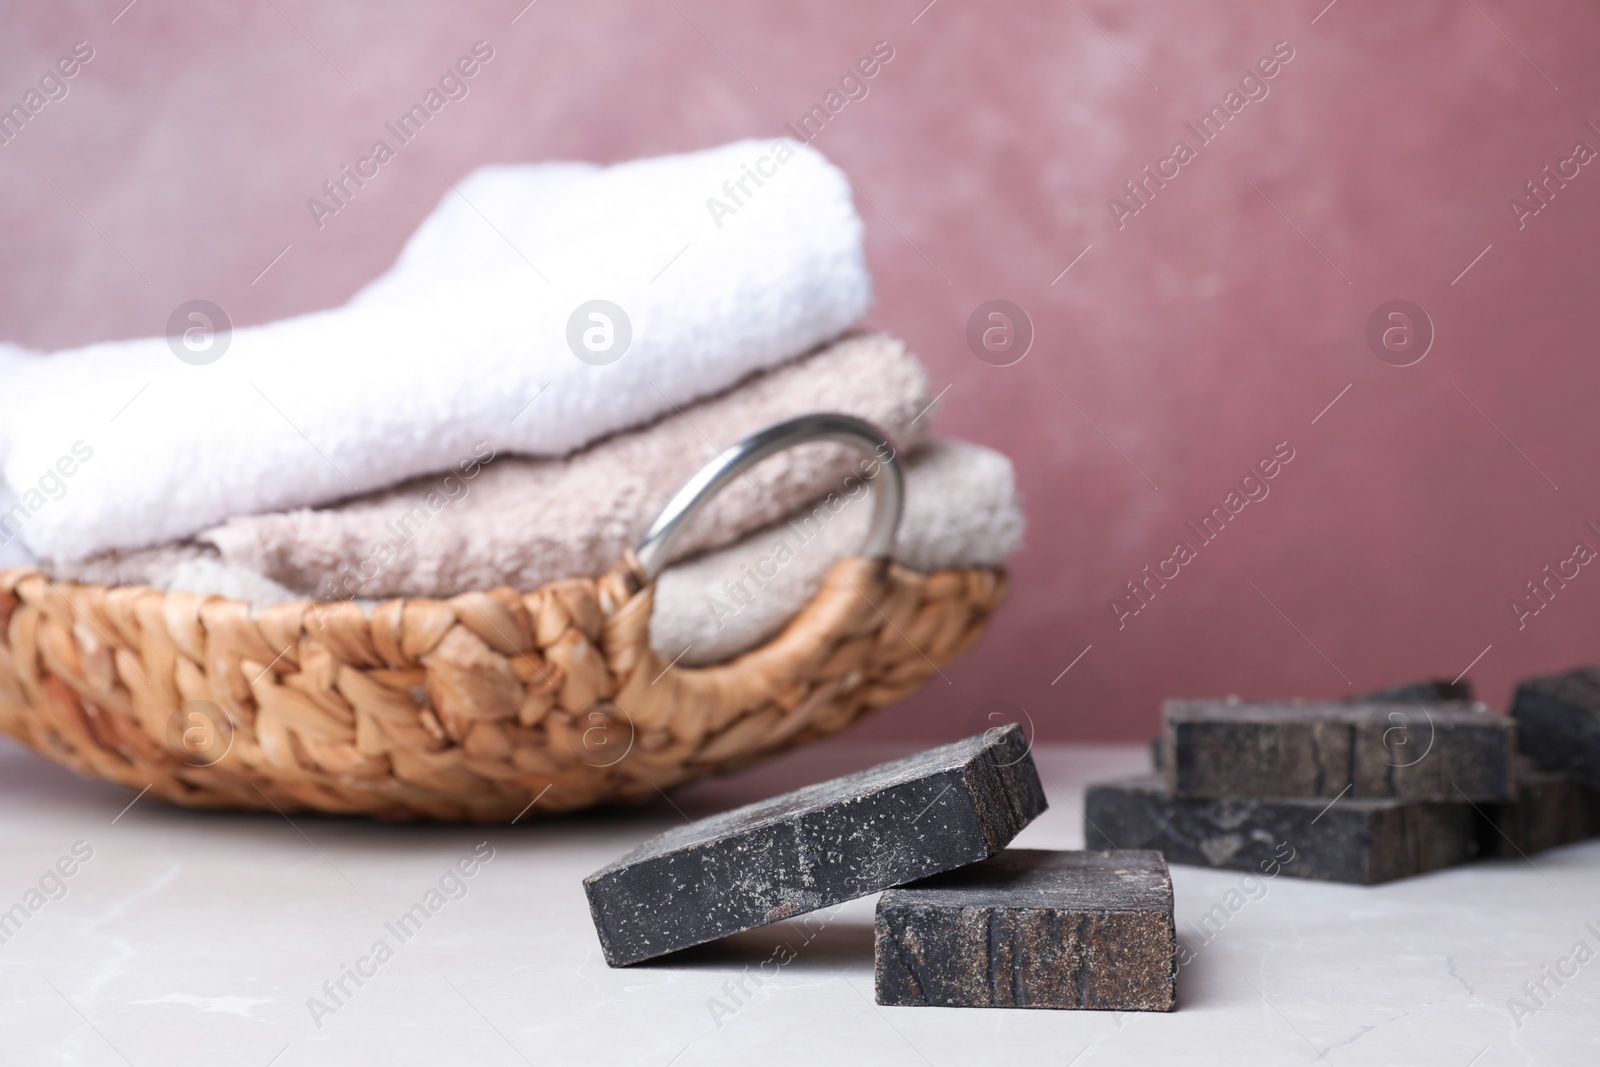 Photo of Natural handmade soap bars on light table against color background